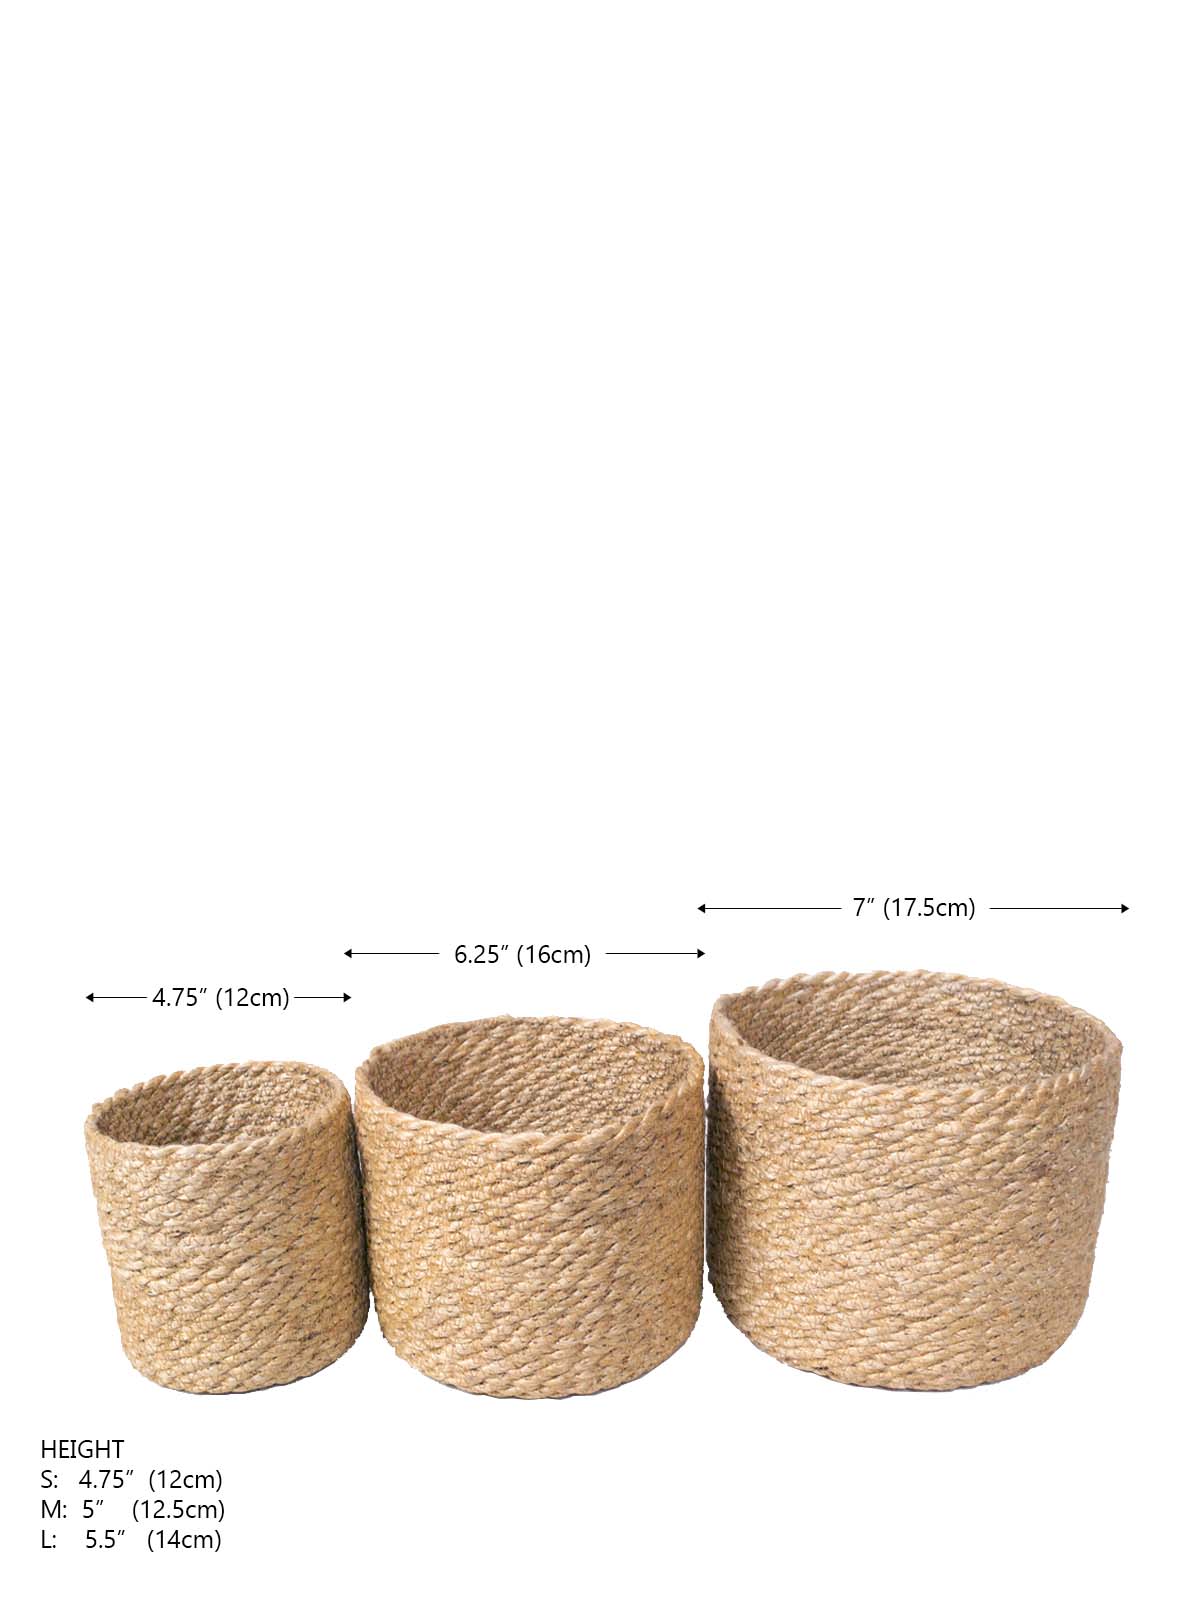 Choose from three sizes to fit your needs. Each bin is beautifully and sustainably made using natural jute.